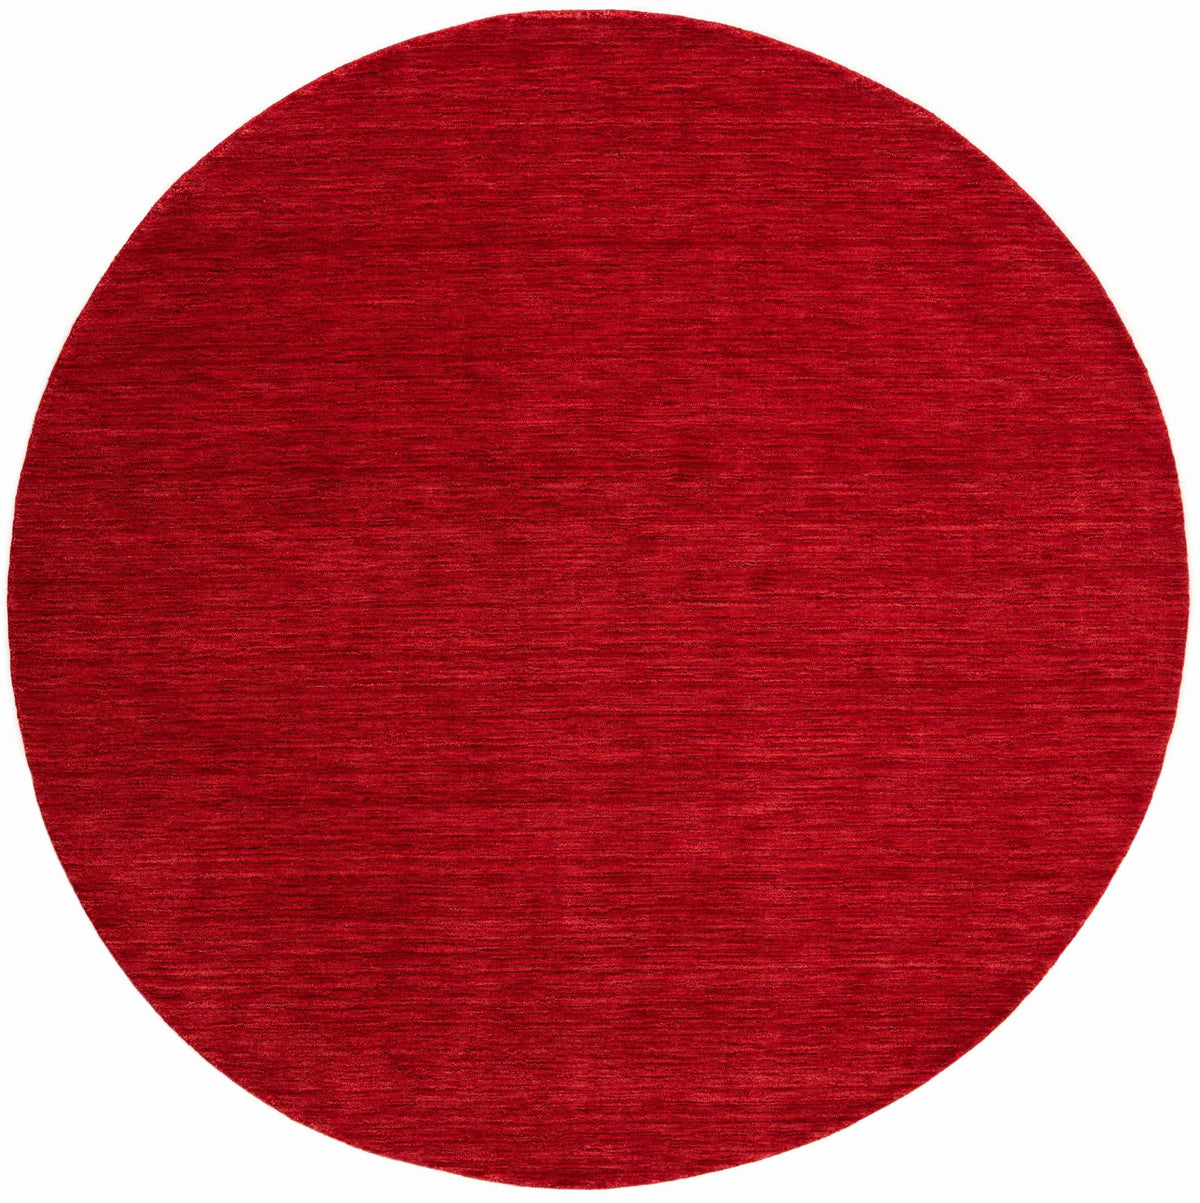 150x150 cm  Indian Wool Multicolor Rug-HLC200126, Red Round